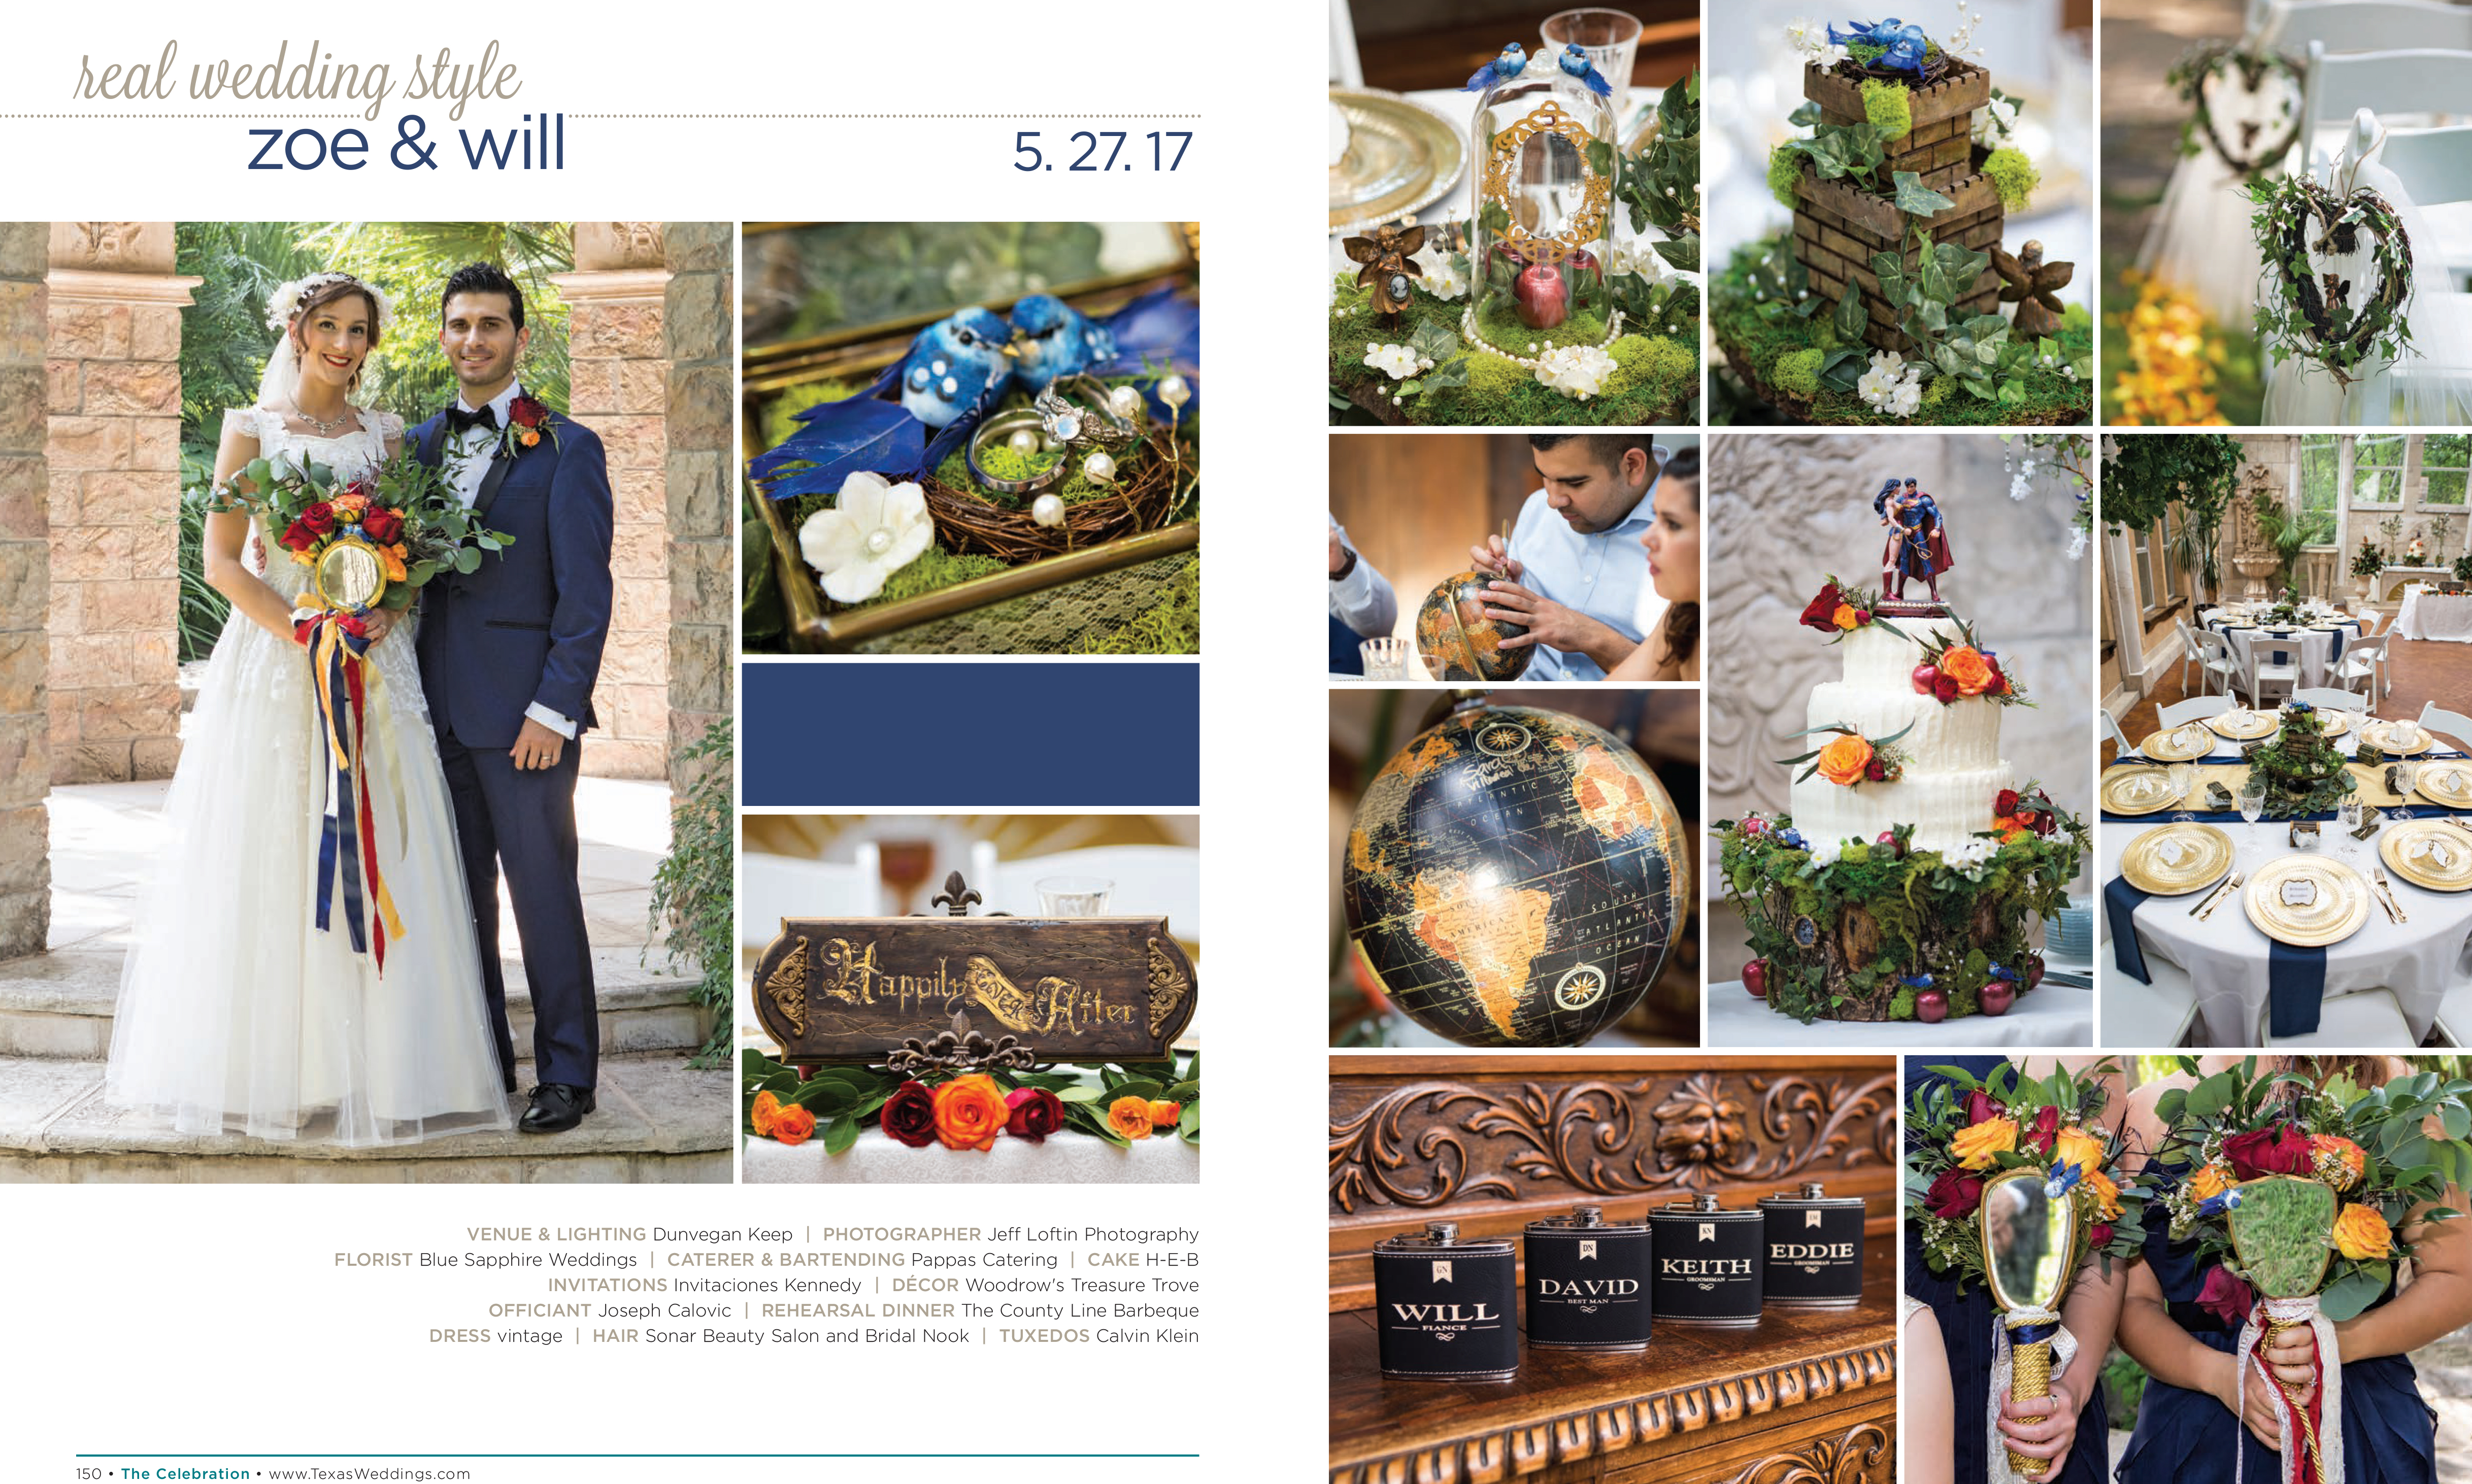 Zoe & Will in their Real Wedding Page in the Fall/Winter 2018 Texas Wedding Guide